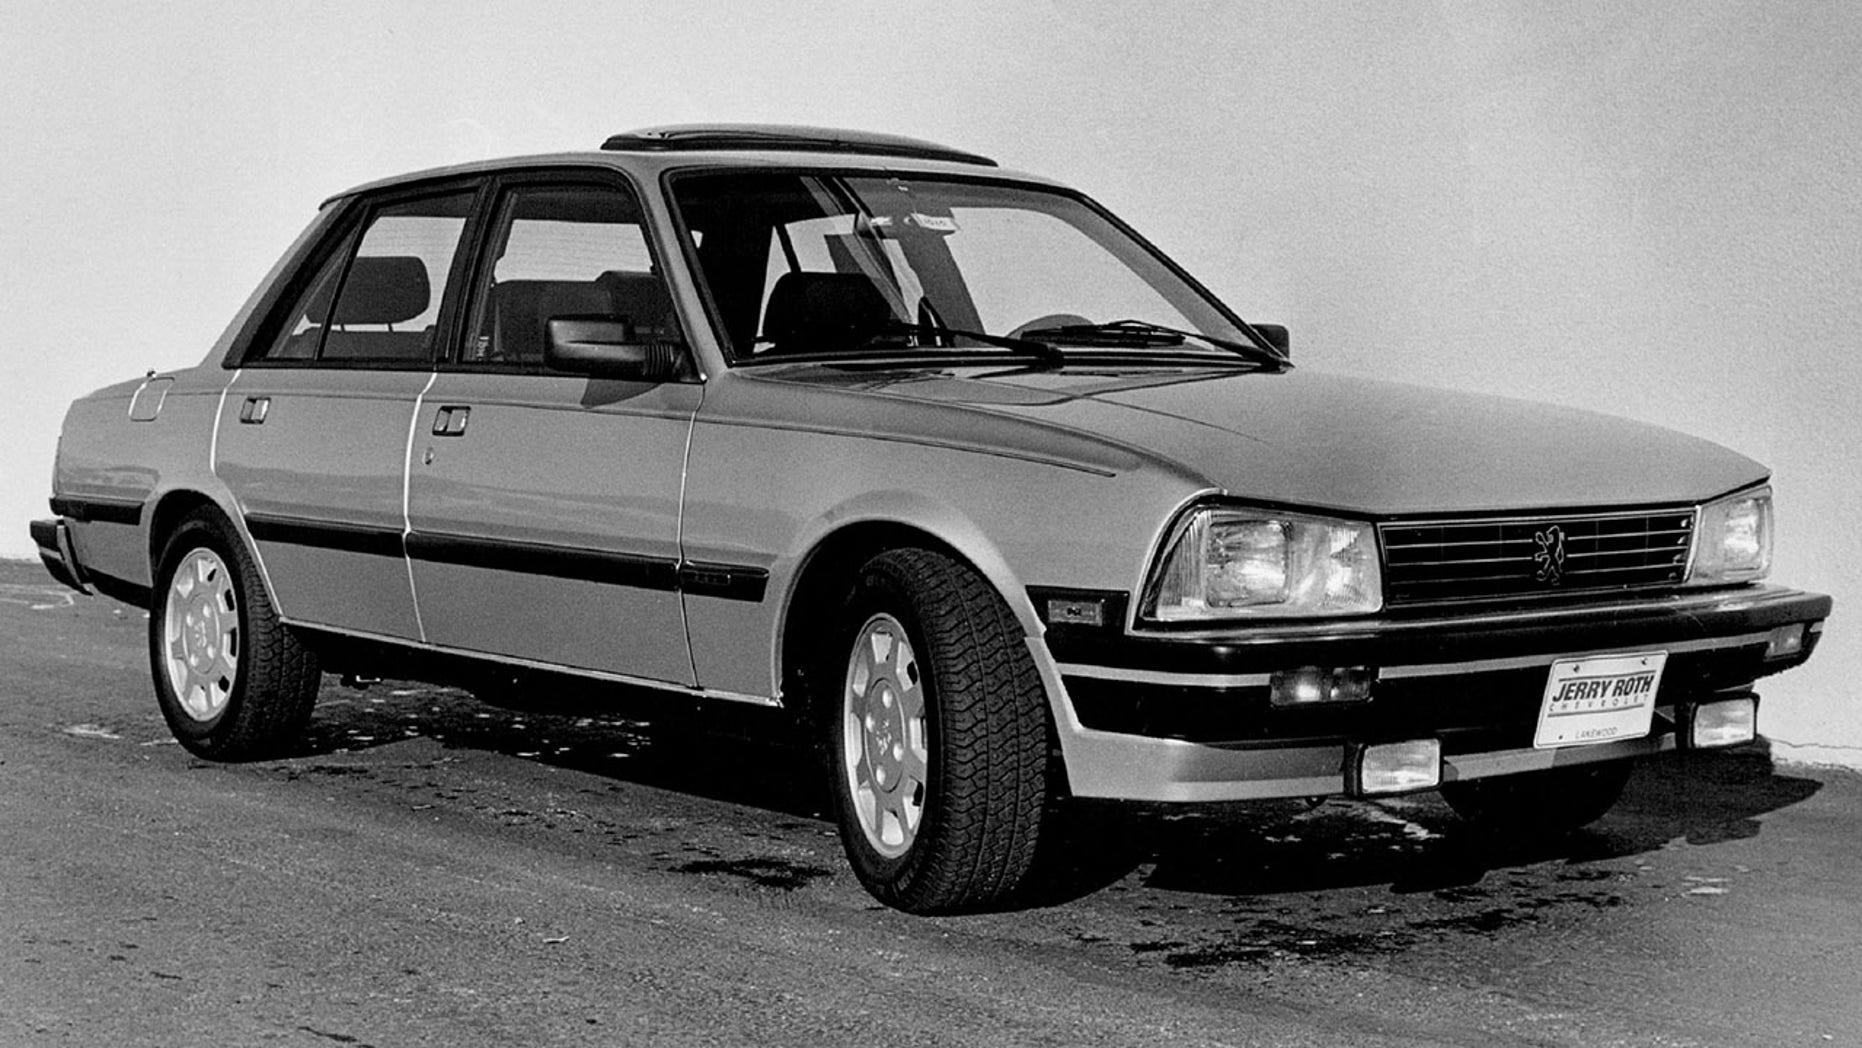 The 505 was one of the most iconic models sold by Peugeot in the United States.